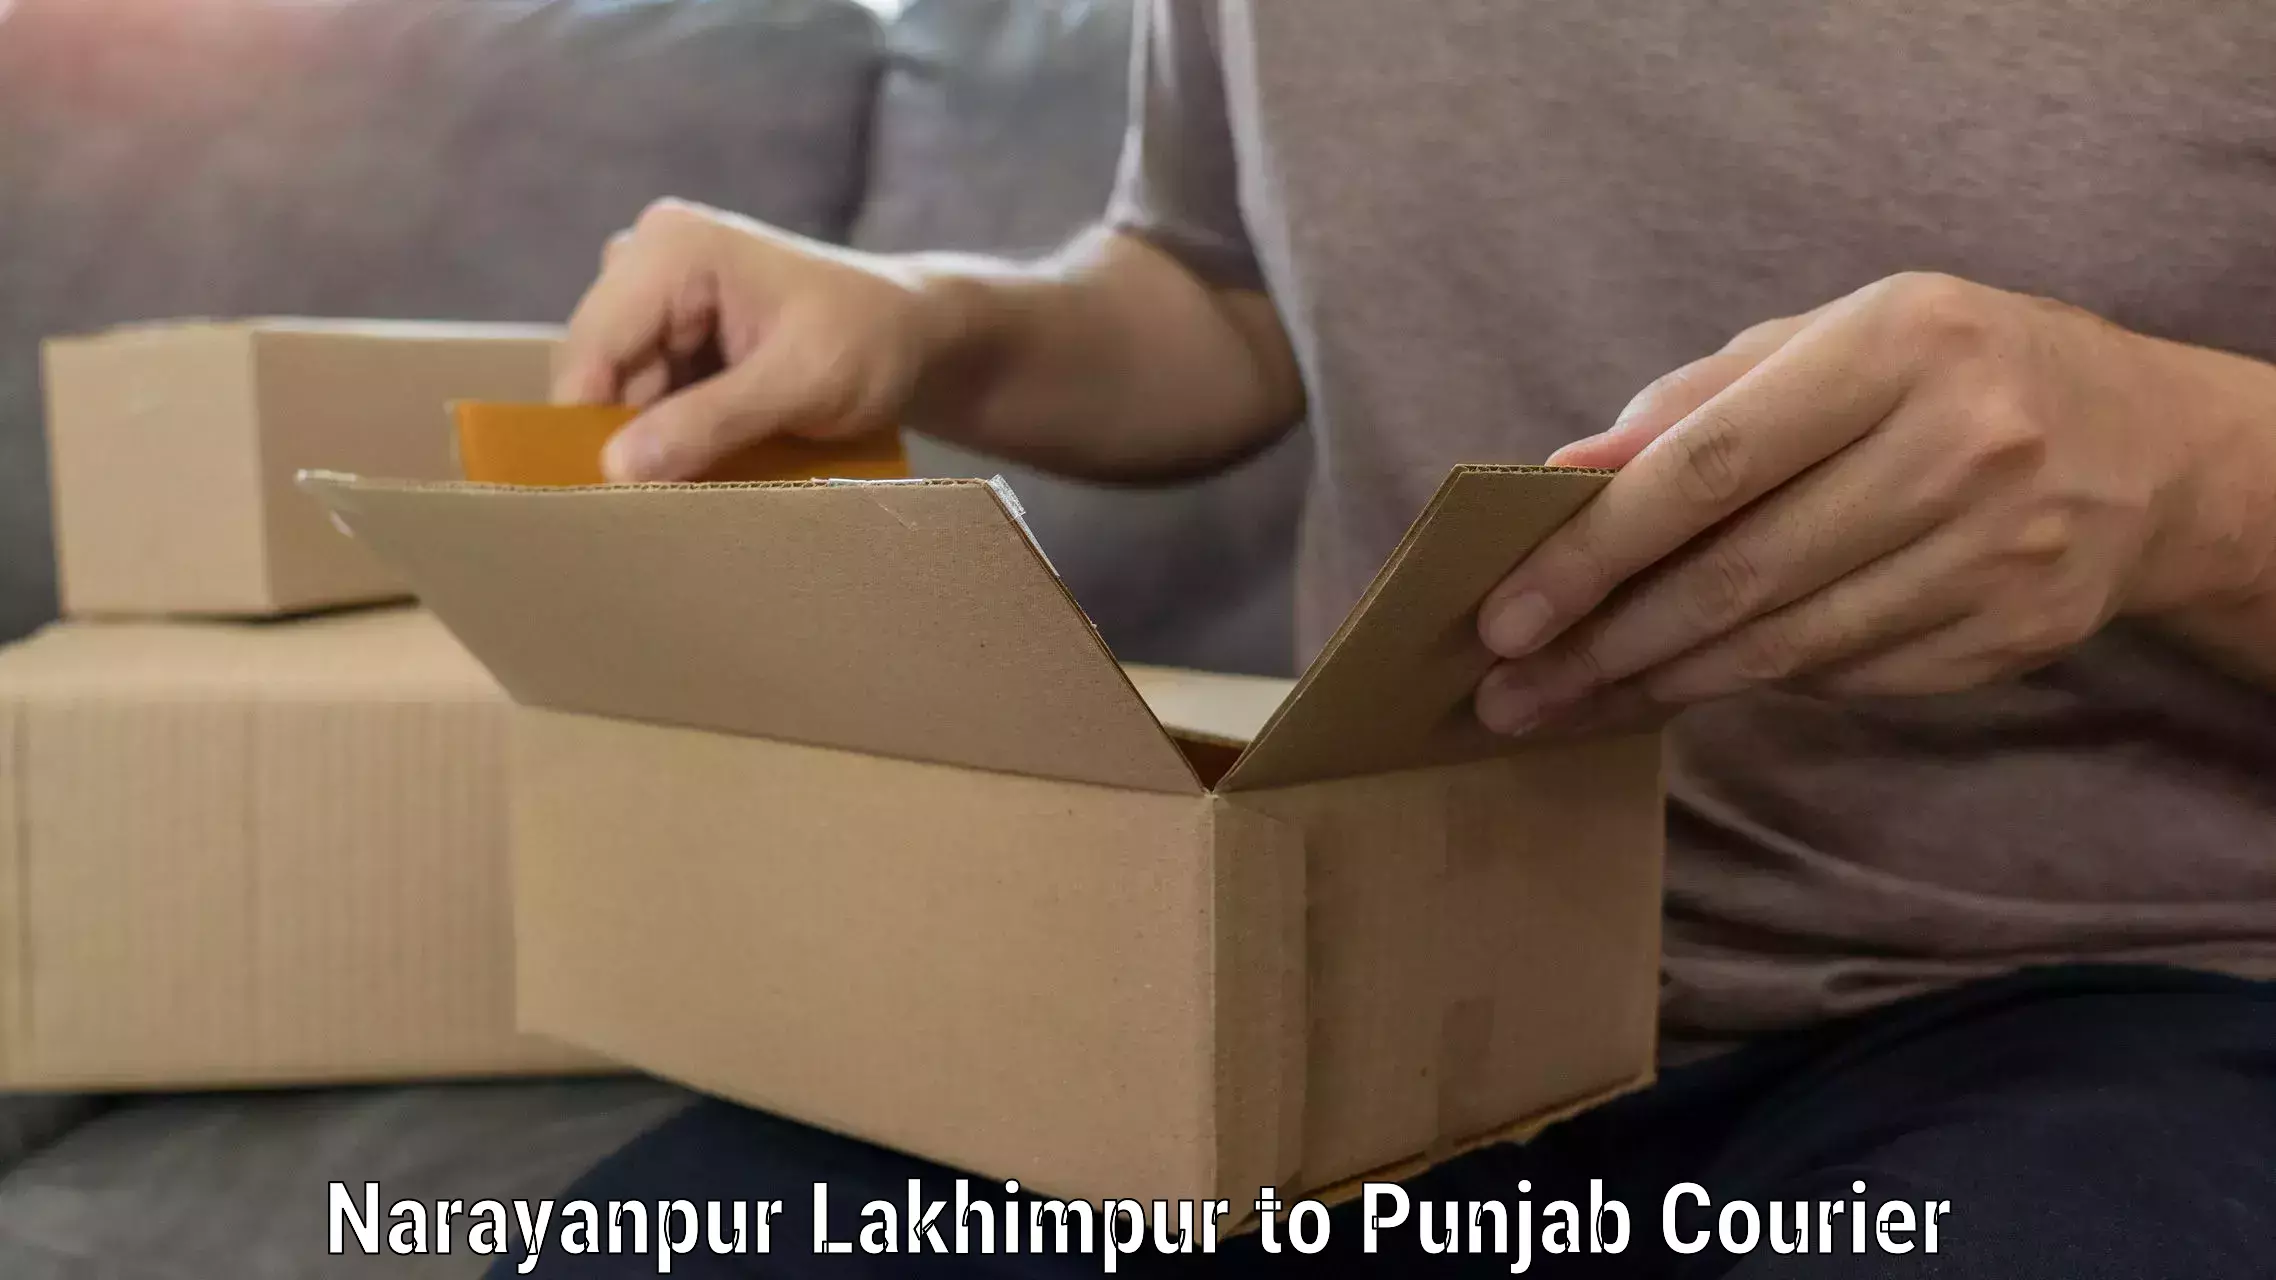 Efficient home goods movers Narayanpur Lakhimpur to Sangrur